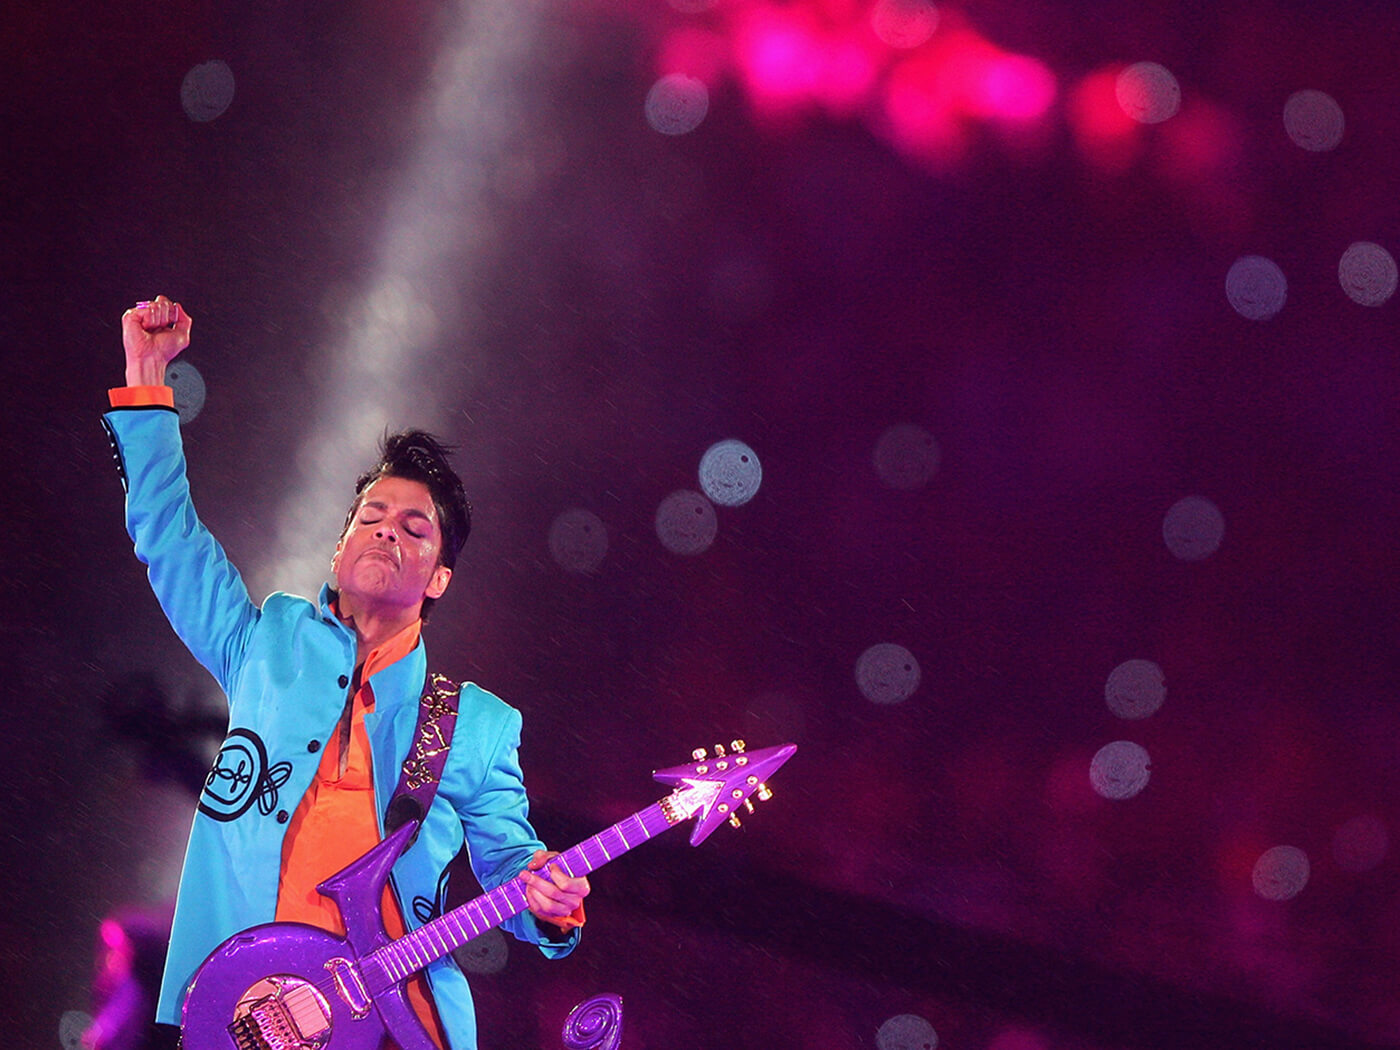 Prince performing at the ‘Pepsi Halftime Show’ at Super Bowl XLI in 2007, photo by Jed Jacobsohn/Getty Images